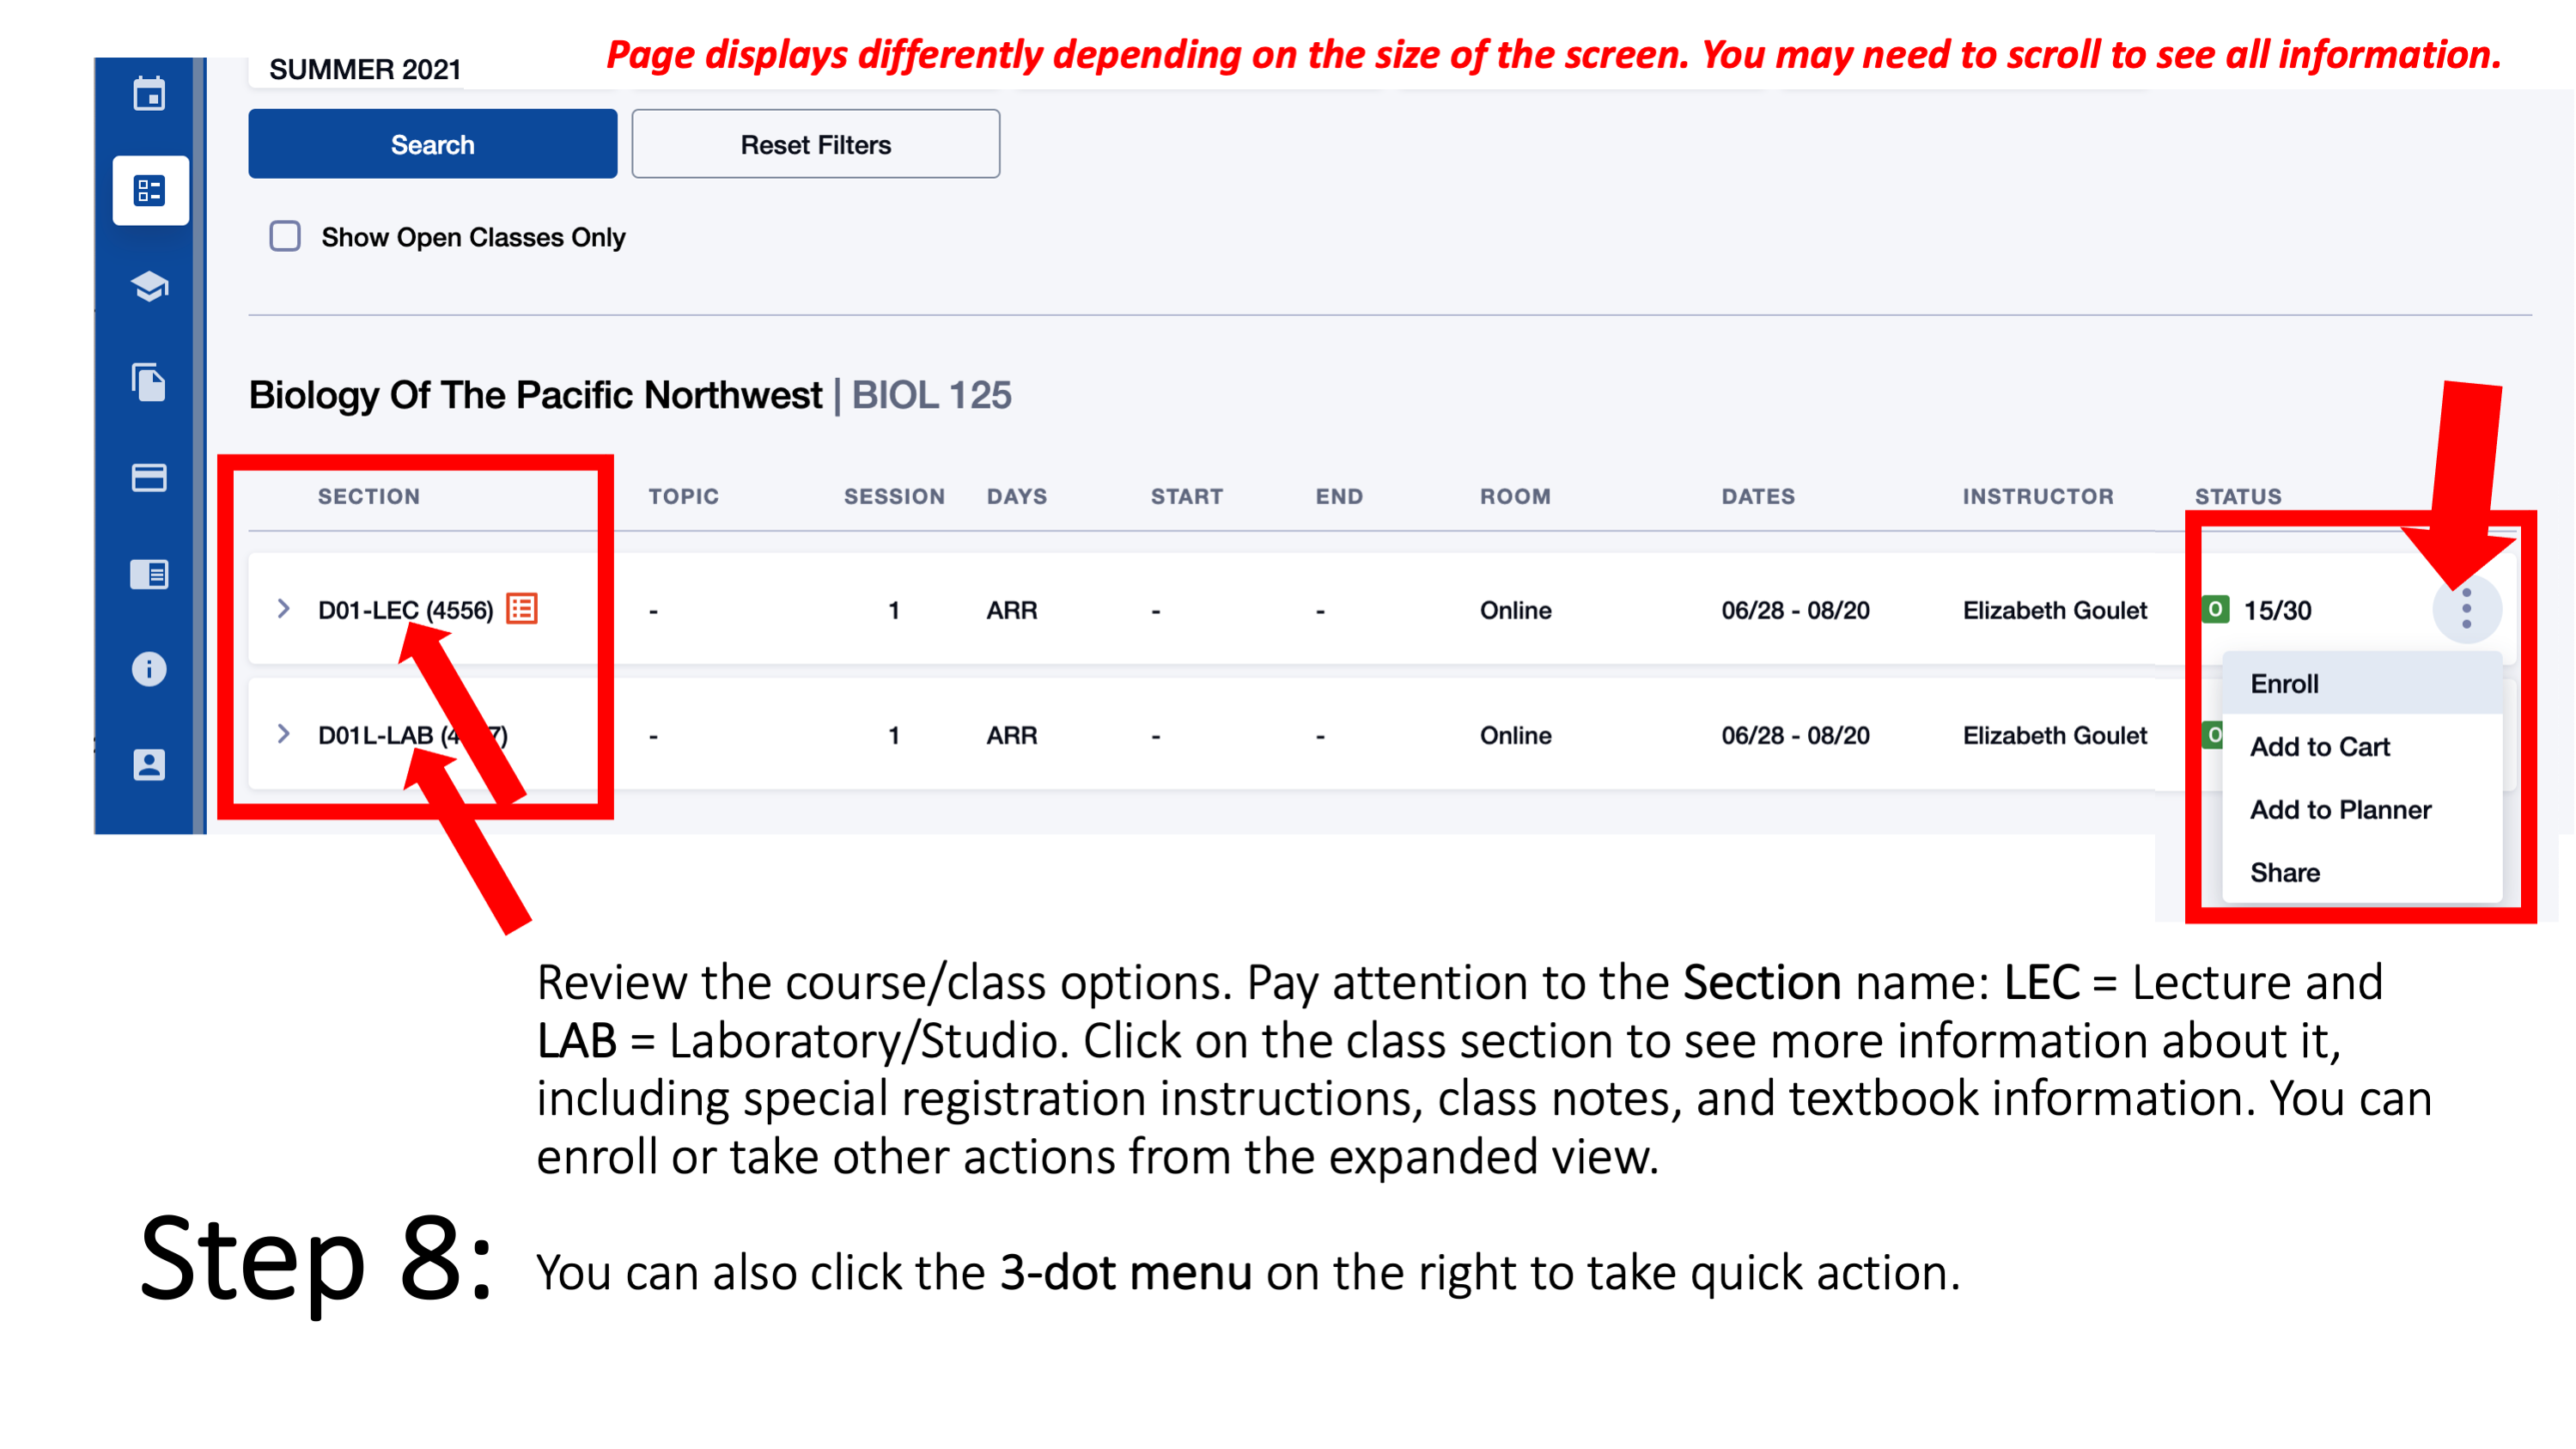 Step 8: Review the course/class options. Pay attention to the Section name: LEC = Lecture and LAB = Laboratory/Studio. Click on the class section to see more information about it, including special registration instructions, class notes, and textbook information. You can enroll or take other actions from the expanded view. You can also click the 3-dot menu on the right to take quick action. Page displays differently depending on the size of the screen. You may need to scroll to see all information.